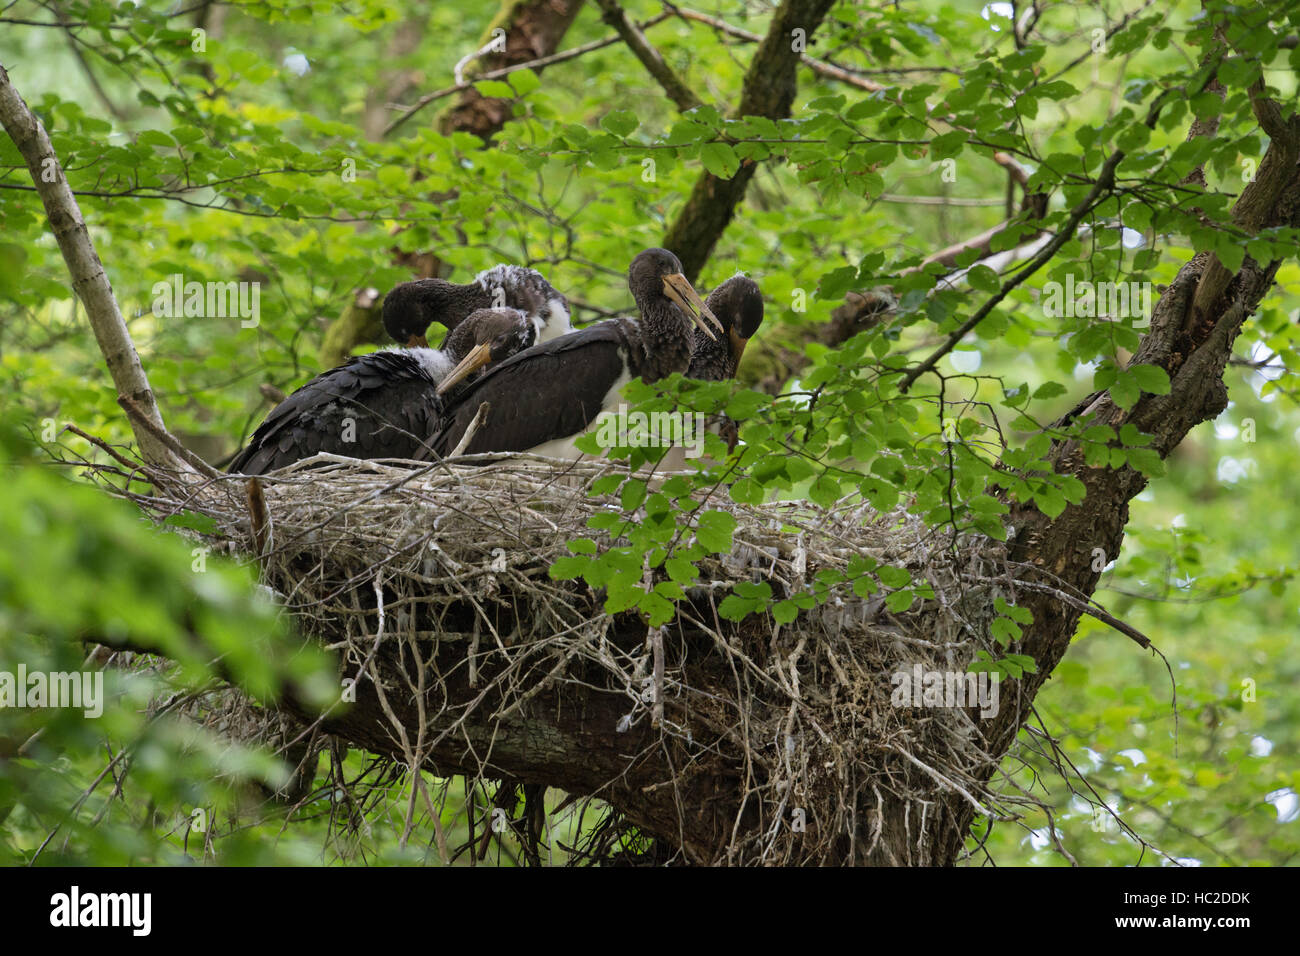 Black Storks ( Ciconia nigra ), offspring, chicks in nest, nesting high up in an old beech tree, cleaning their plumage. Stock Photo